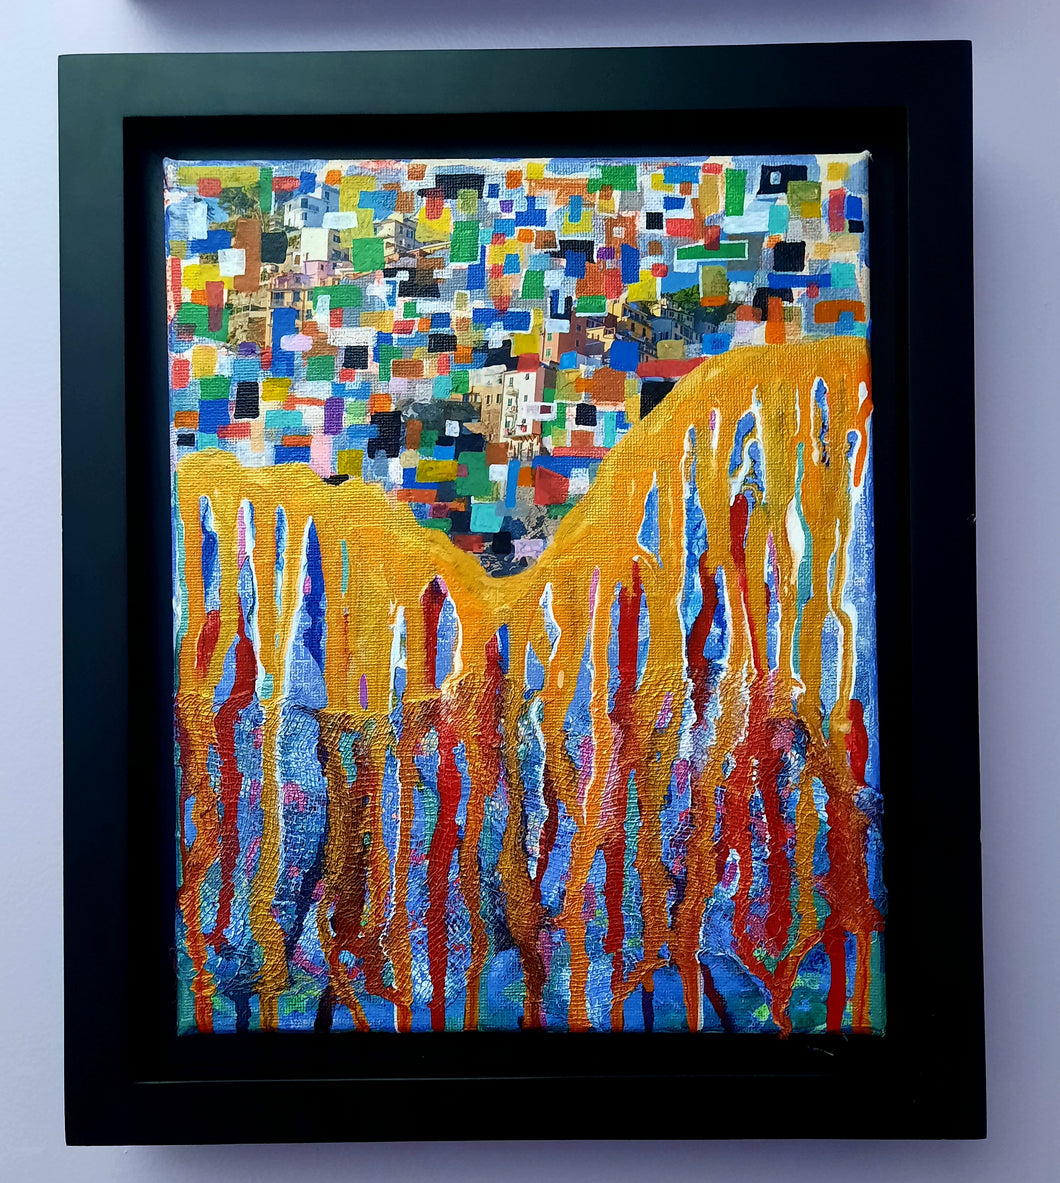 8x10 Canvas Framed - City in The Sky